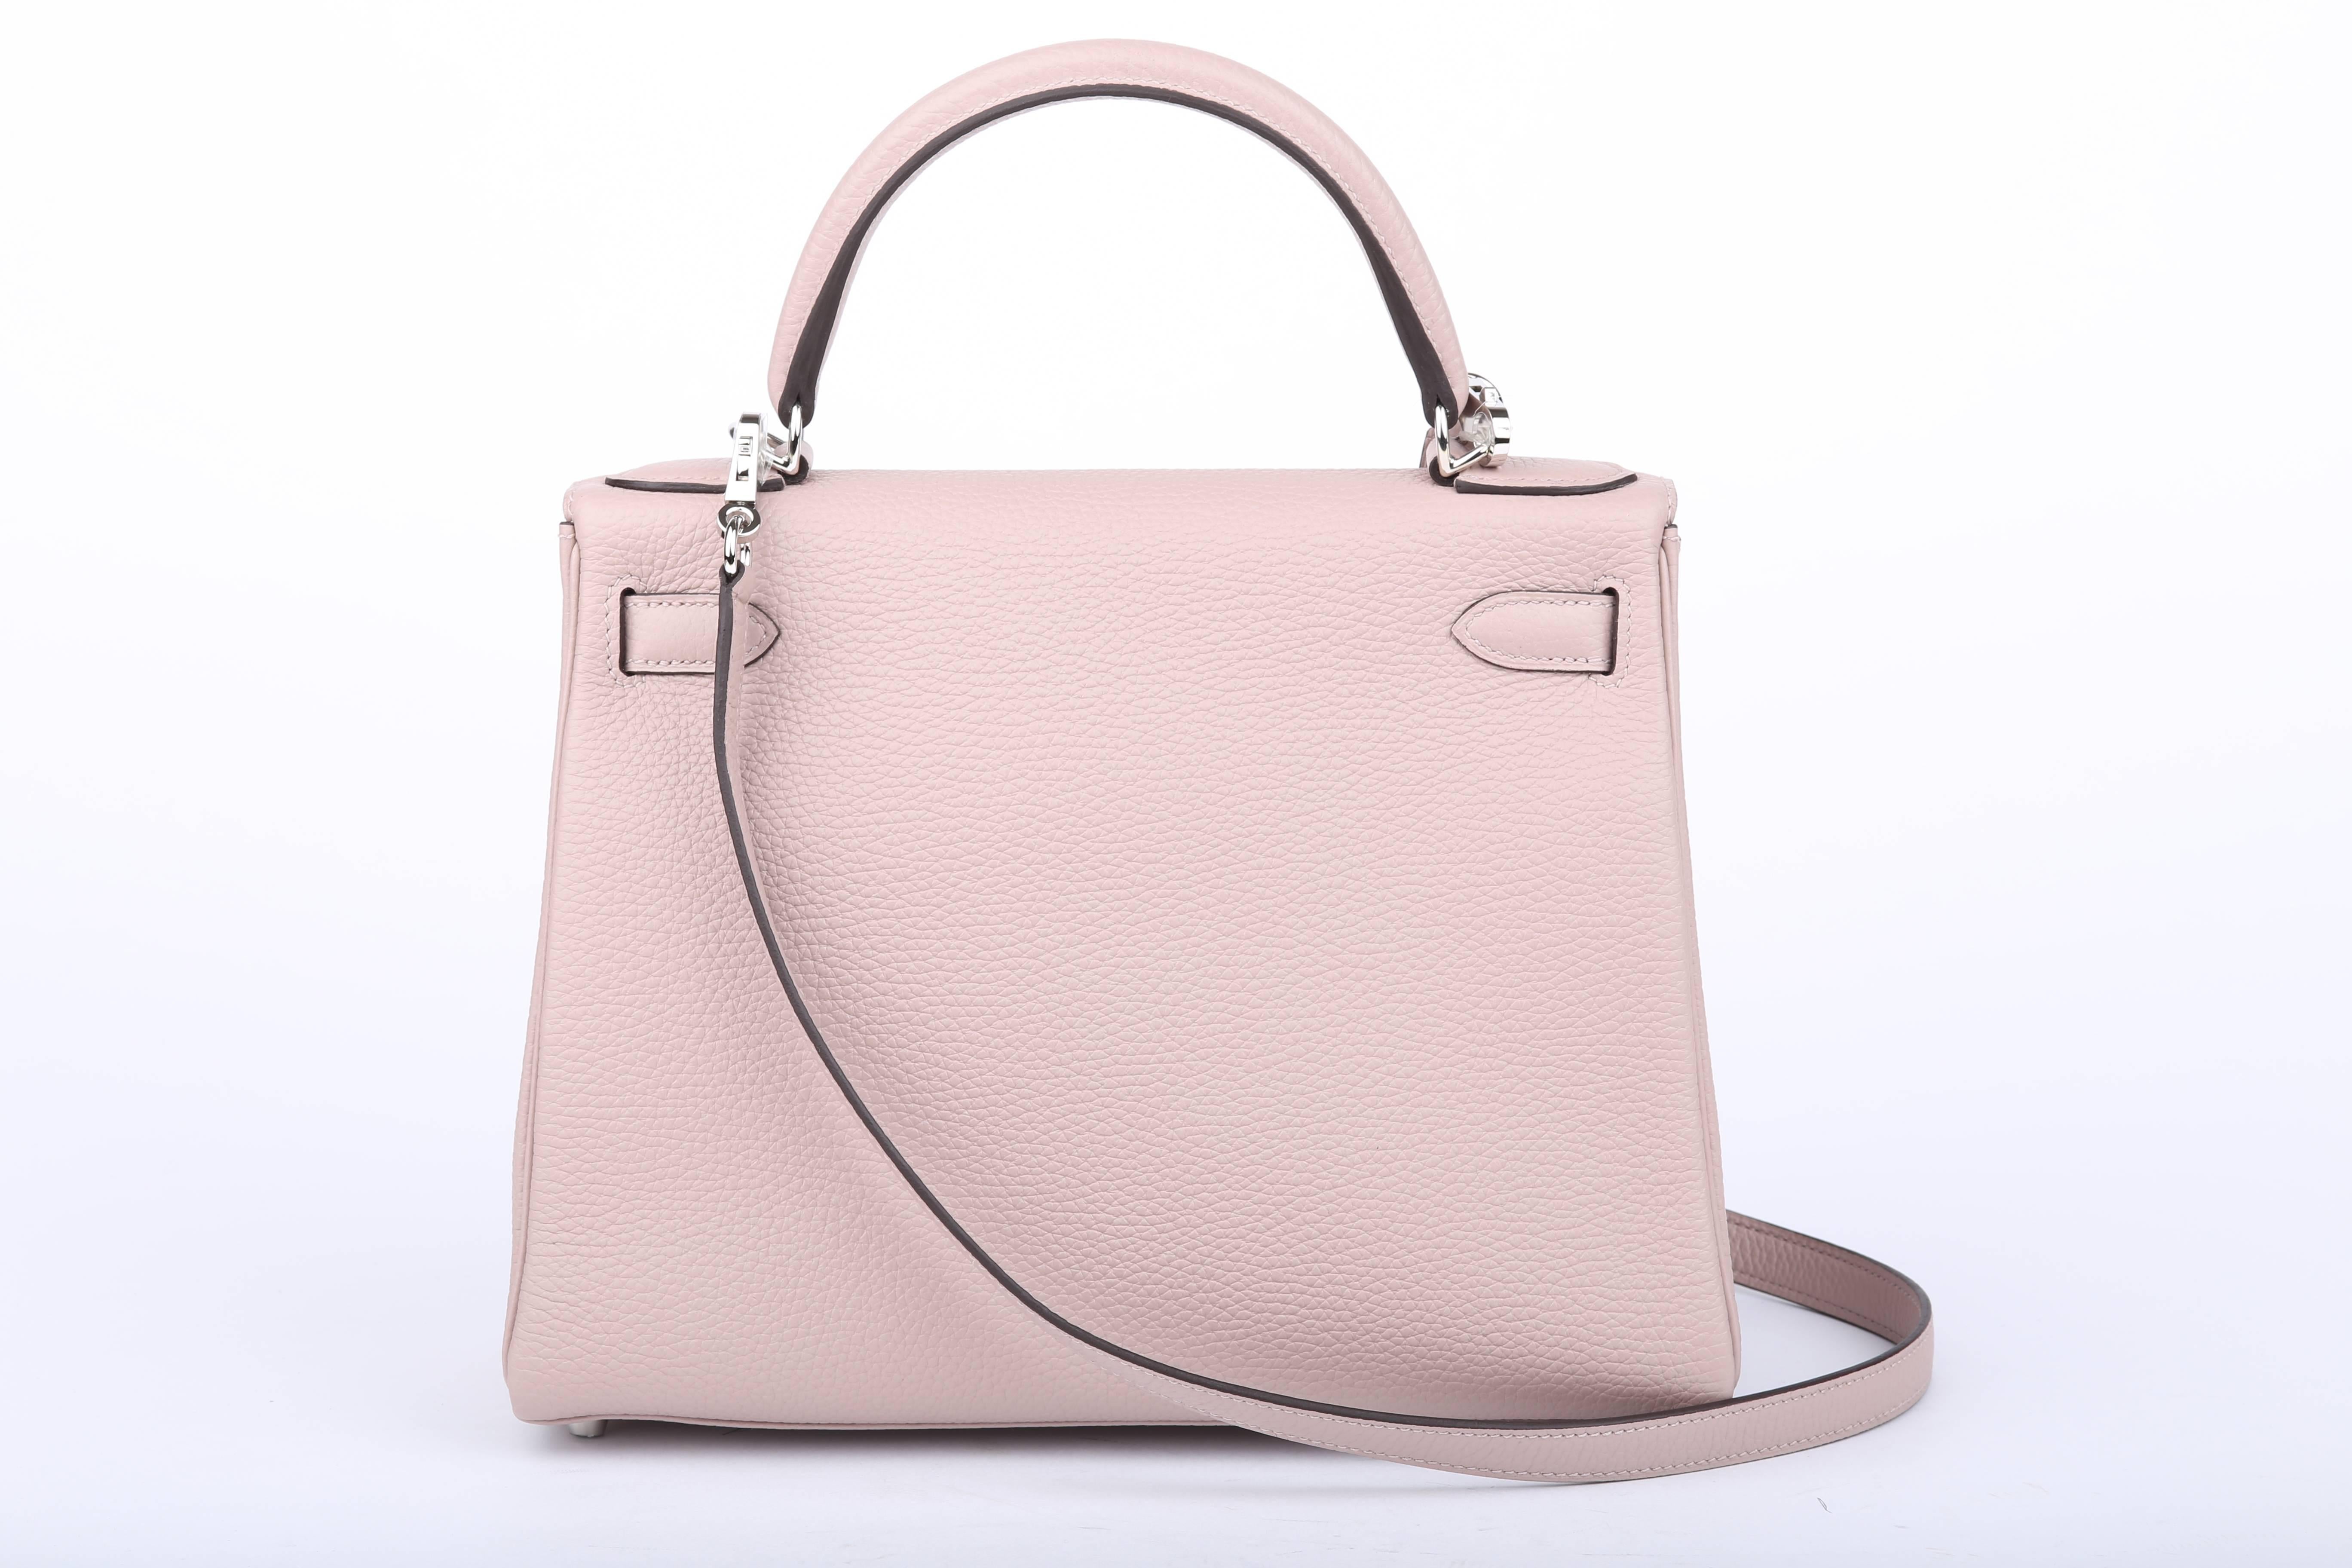 Hermes Kelly cute 28 cm with the New Glycine Color is a muted dusty lilac - yet very neutral ! 

This bag comes with all its details attached -  lock, keys, clochette, a fabric sleeper for the bag, rain protector and BOX! 

The item has original